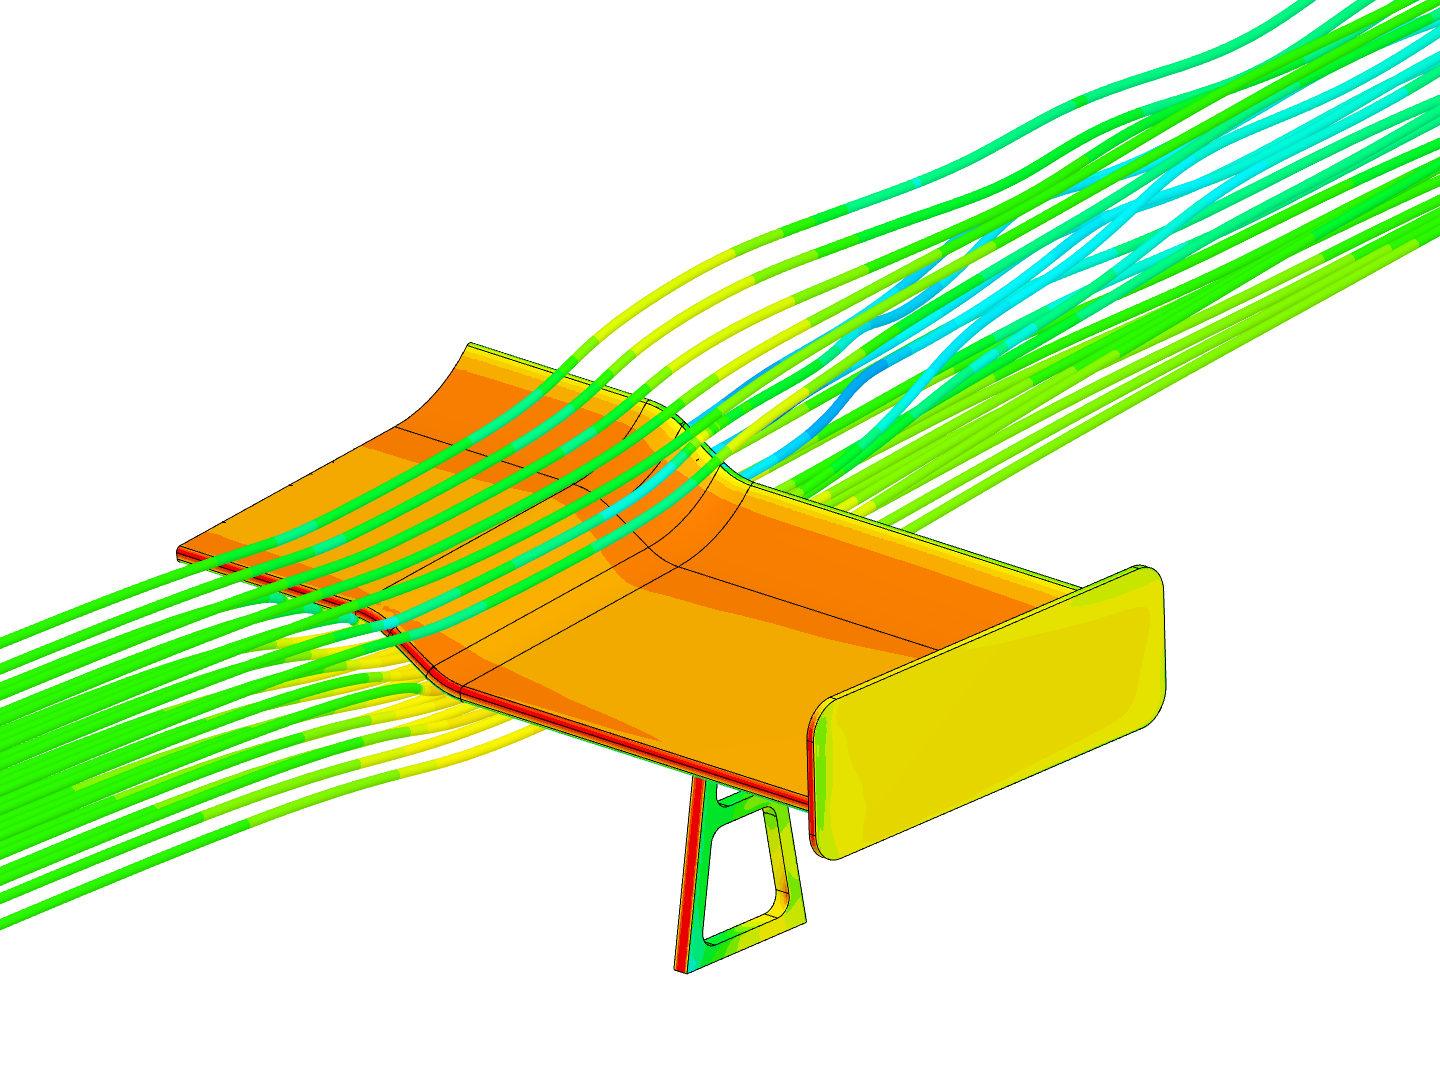 Coursera - Airflow around a GT Car Spoiler - Andrew's copy image